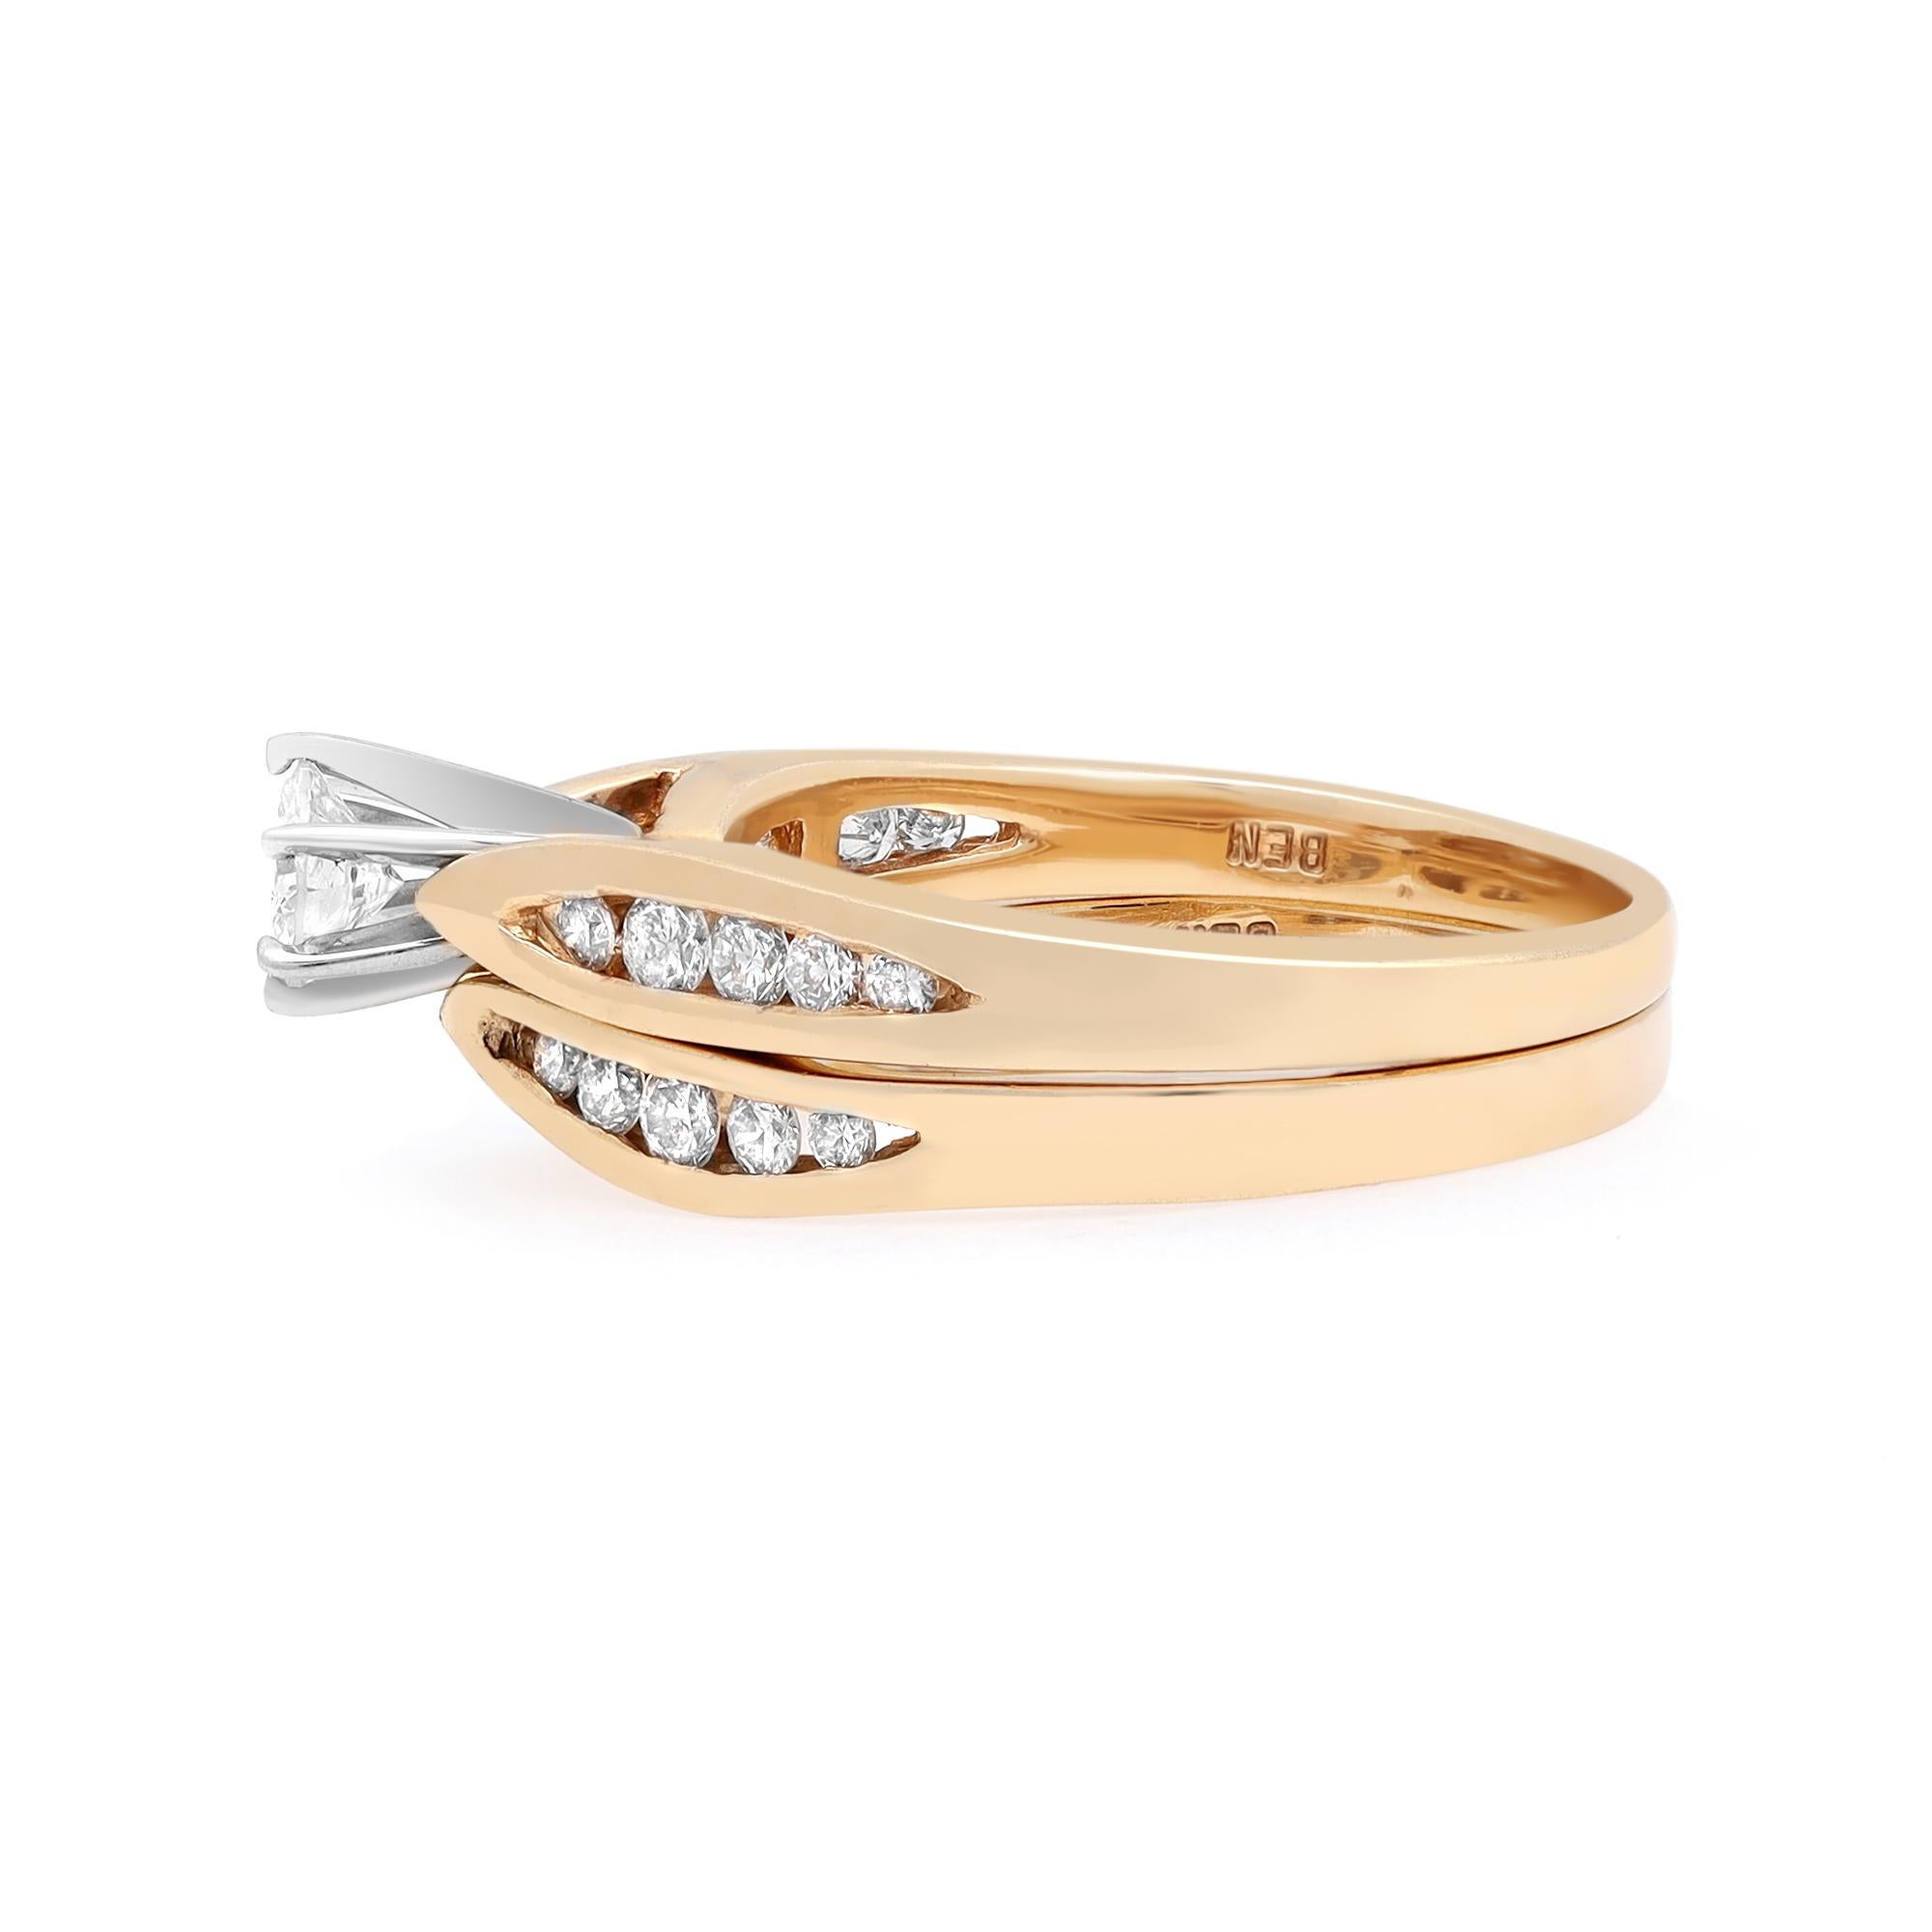 This is a beautiful bridal ring set, a combination of an engagement ring and a wedding band. Simple and chic, this ring set is a beautiful reminder of your timeless love. Mounted in fine 14k yellow gold. The classic engagement ring features a prong